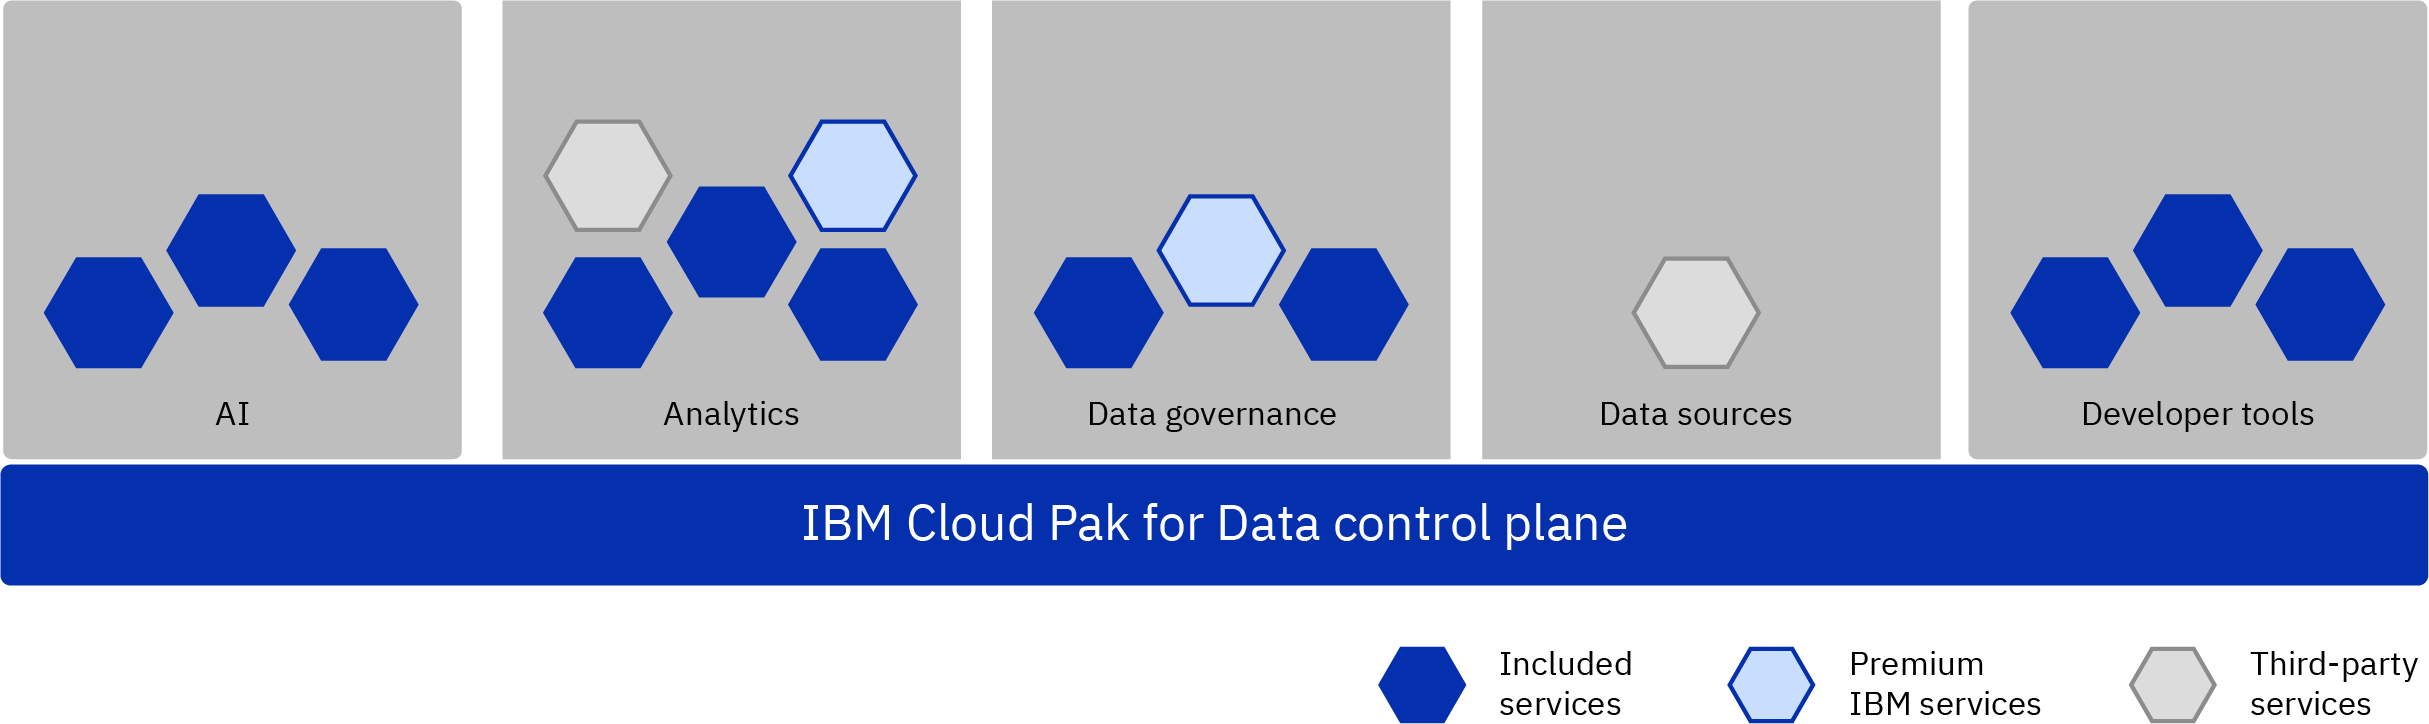 Illustration showing several types of services installed on the Cloud Pak for Data control plane